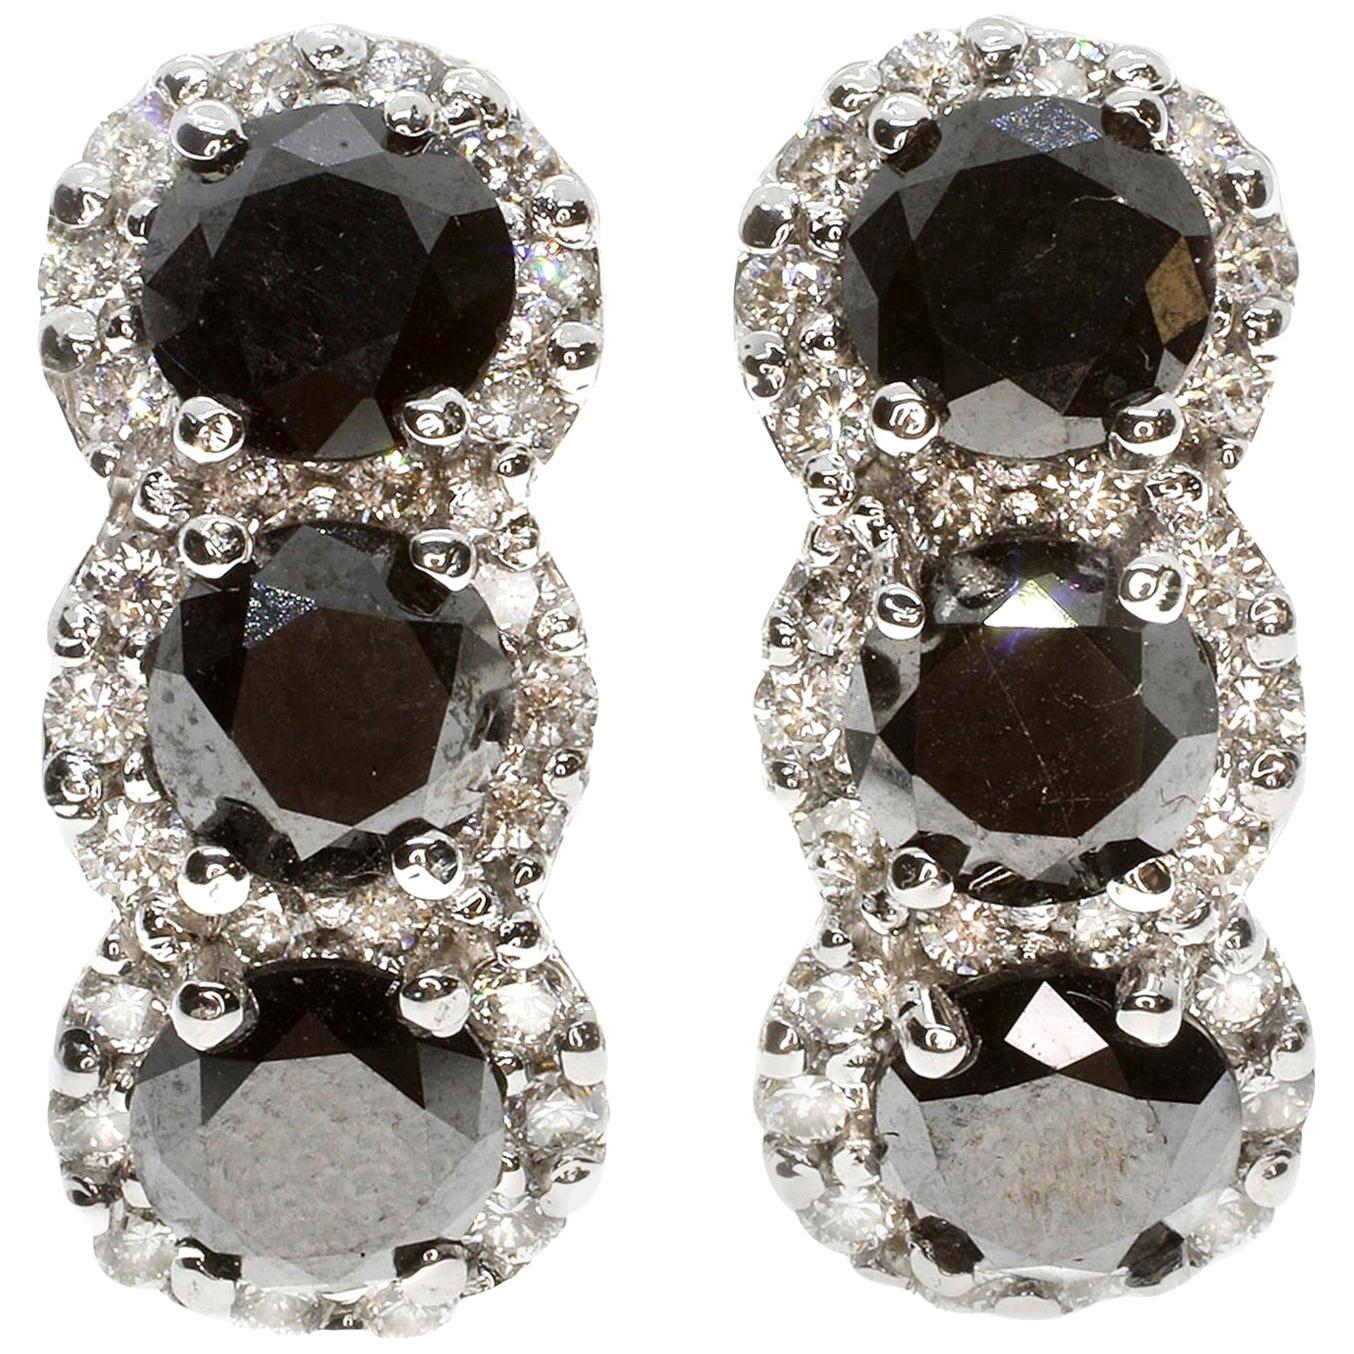 Contemporary 18 Karat White Gold with Black and White Diamond Earrings